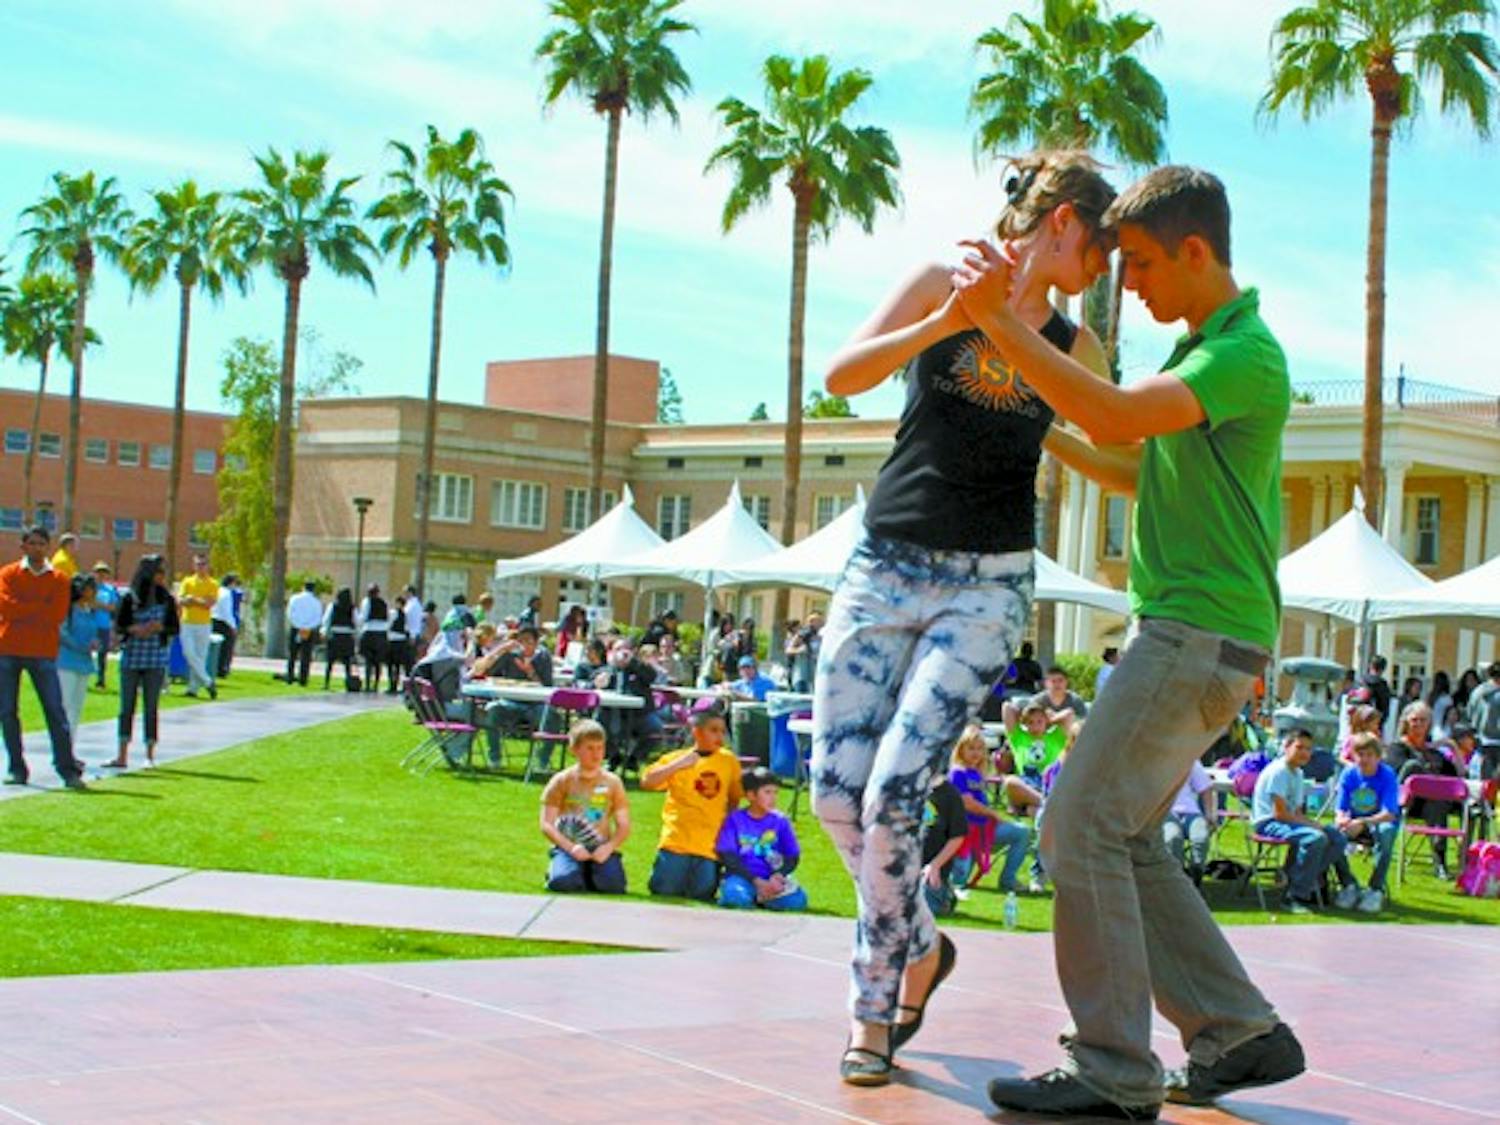 TAKES TWO TO TANGO: Senior biochemistry major Glen Feder and sophomore elementary education major Cassi Willis represent the ASU Argentine Tango Club at the World Festival Tuesday afternoon on Hayden Lawn.  (Photo by Katy Tipton)